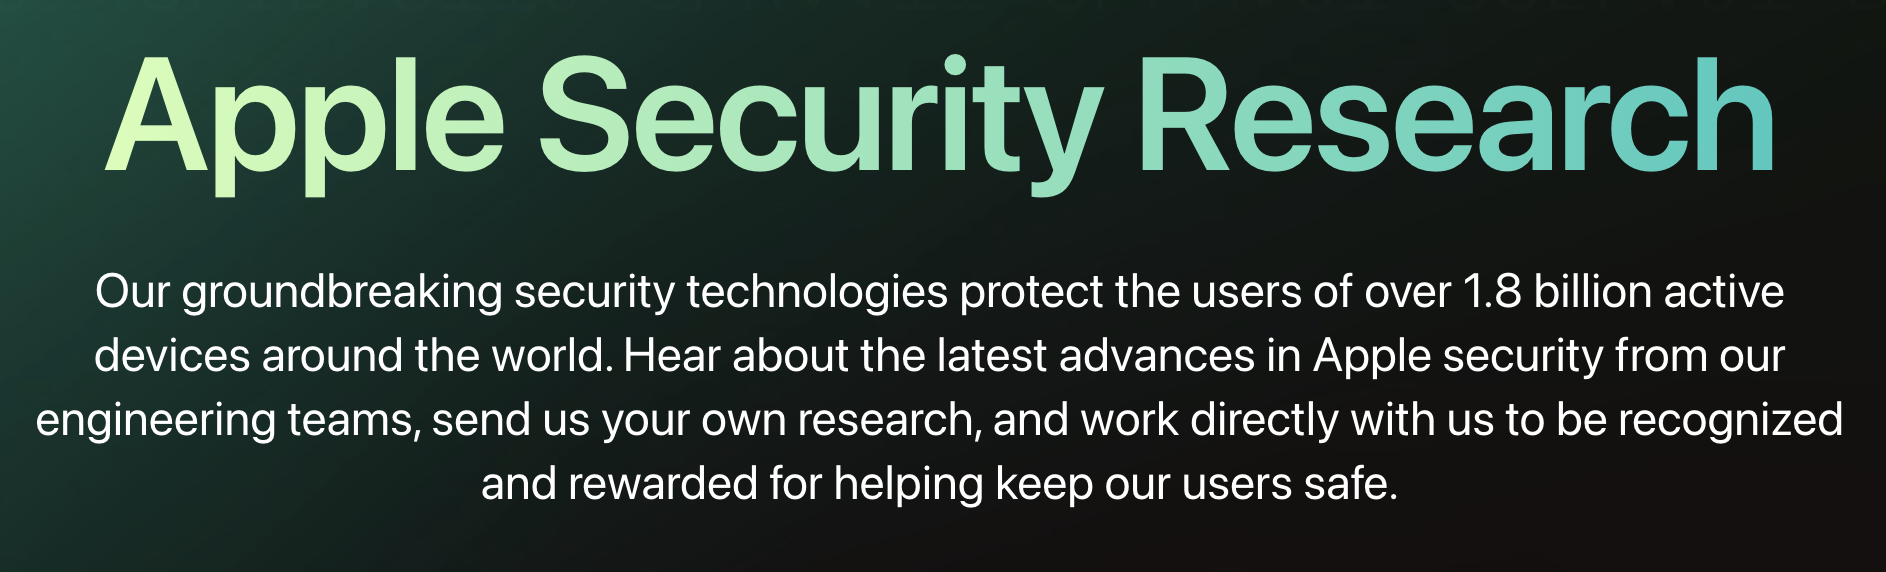 Apple Security Research: Our groundbreaking security technologies protect the users of over 1.8 billion active devices around the world. Hear about the latest advances in Apple security from our engineering teams, send us your own research, and work directly with us to be recognized and rewarded for helping keep our users safe.